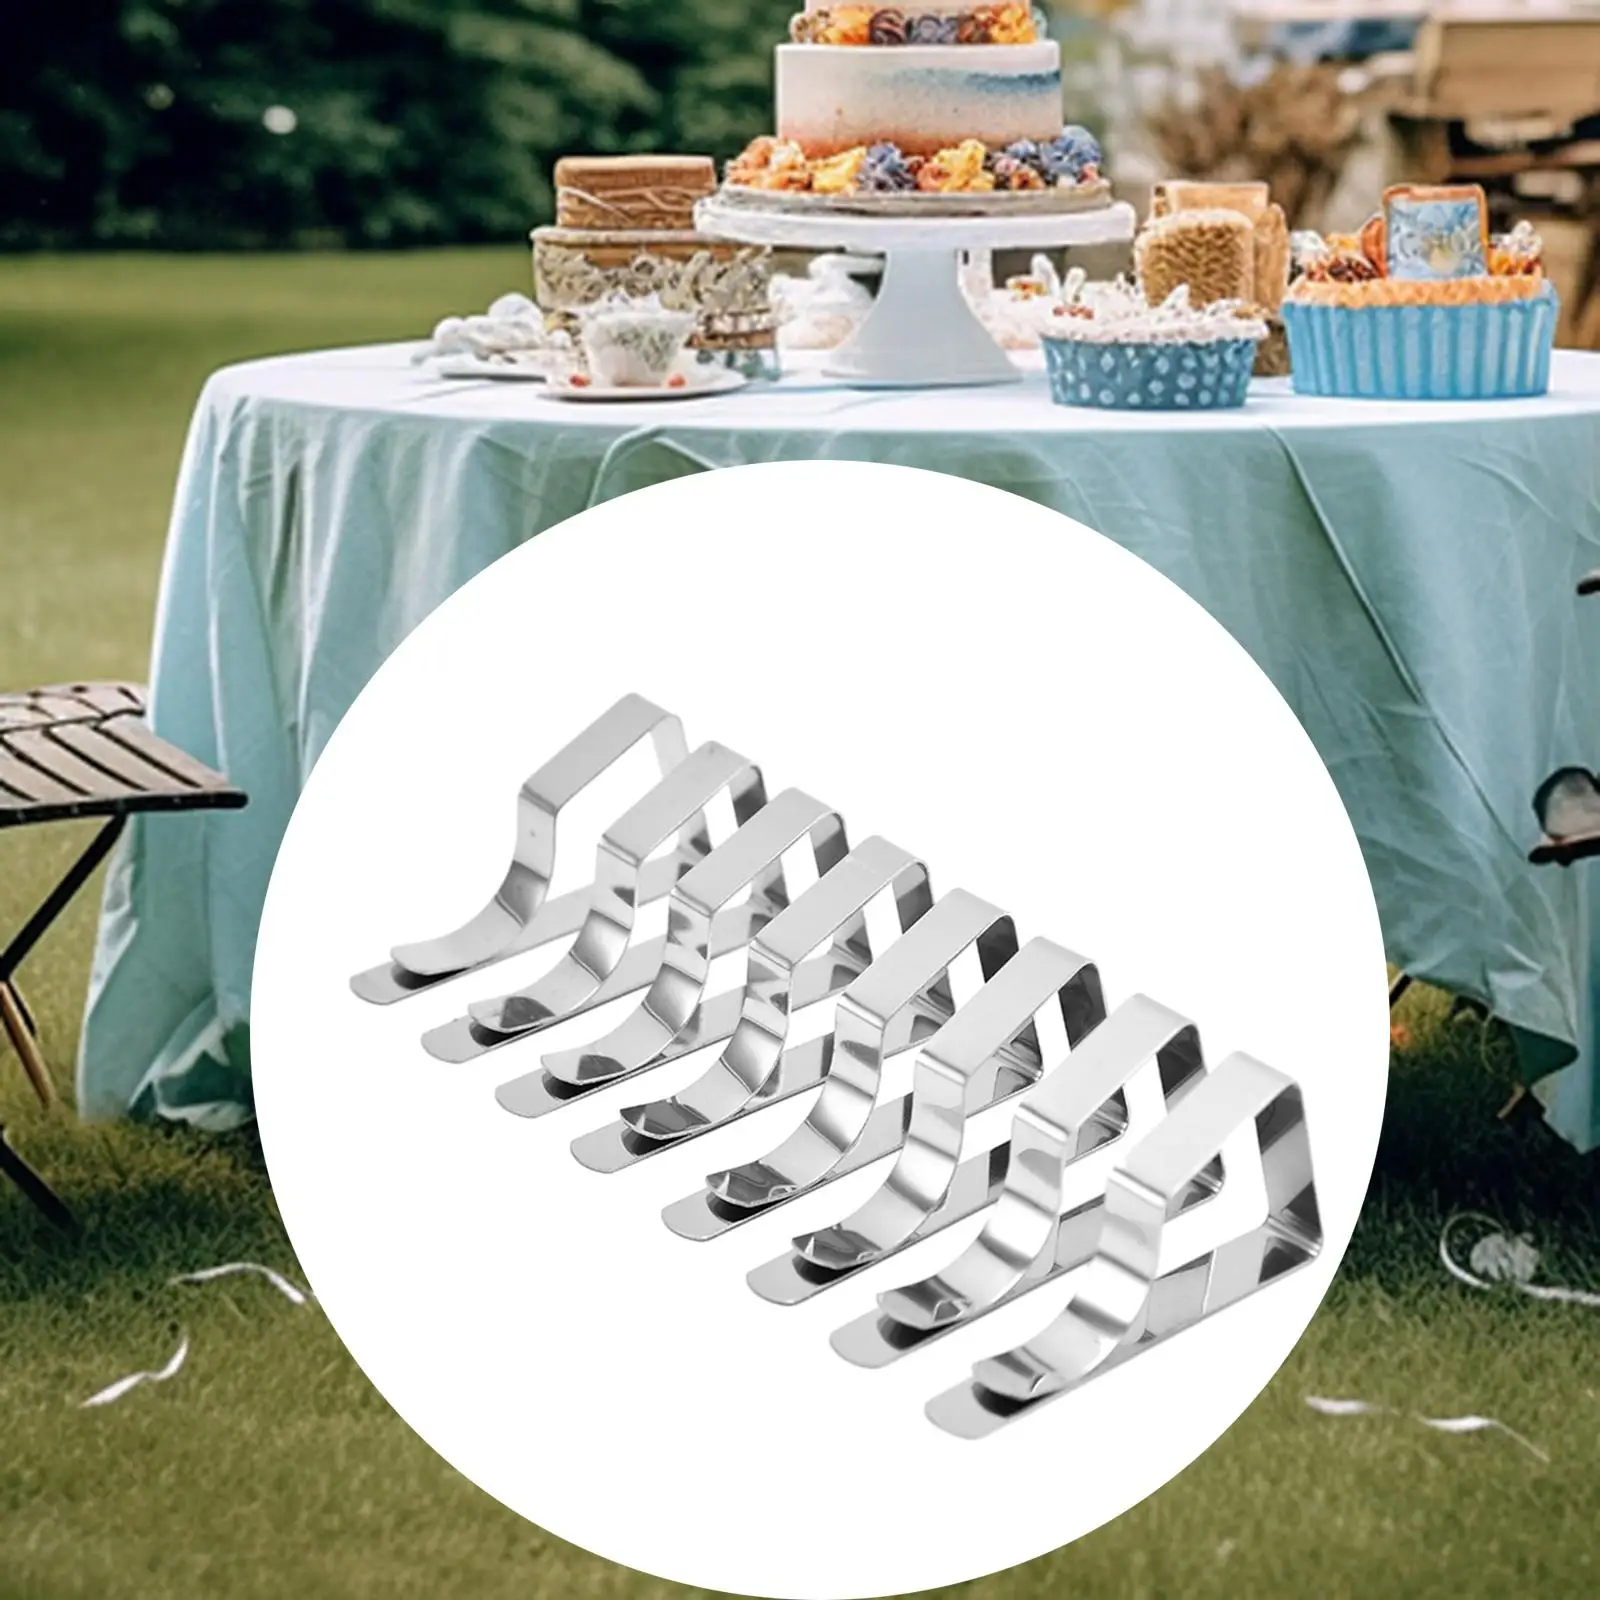 8x Picnic Tablecloth Clips Durable Table Cover Holder Sturdy Tablecloth Clamp Holder Table Cover Clips Events Picnic Banquet